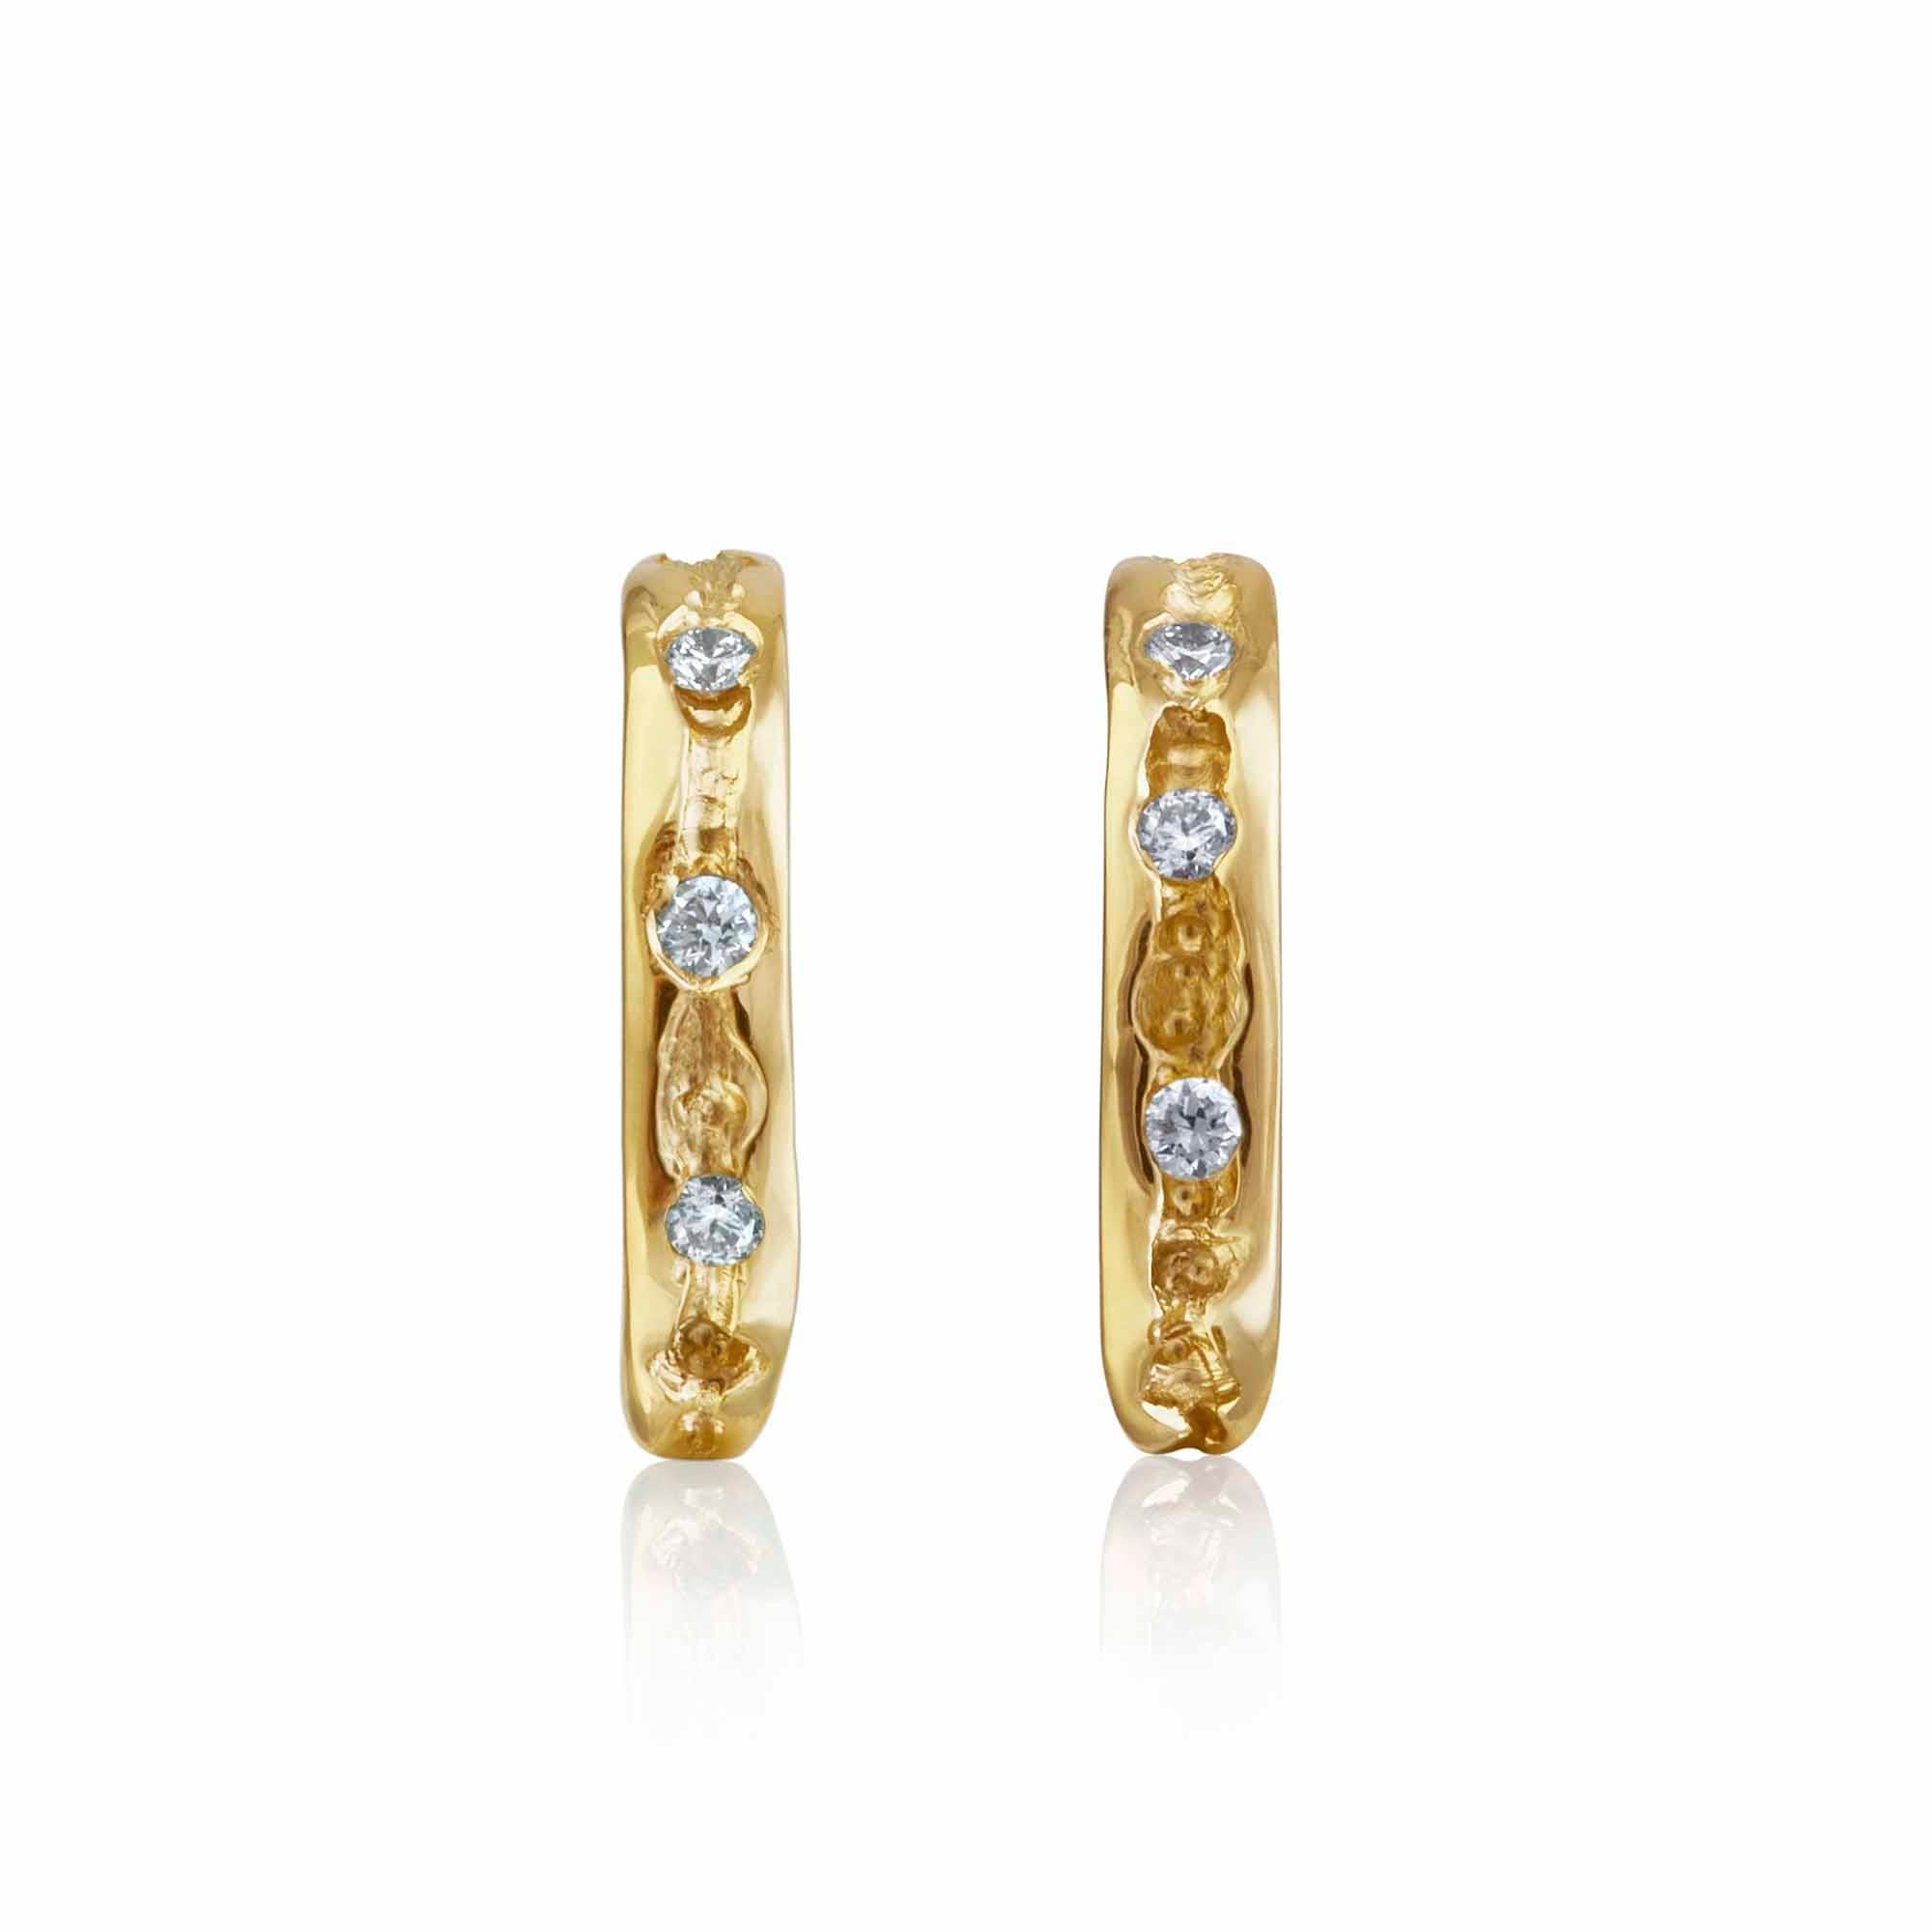 Embrace the enchanting allure of our Huggie Hoop Earrings, inspired by the captivating textures and treasures discovered in beach rock pools. These delightful earrings feature a textured central recess that mirrors the whimsical beauty of rocky